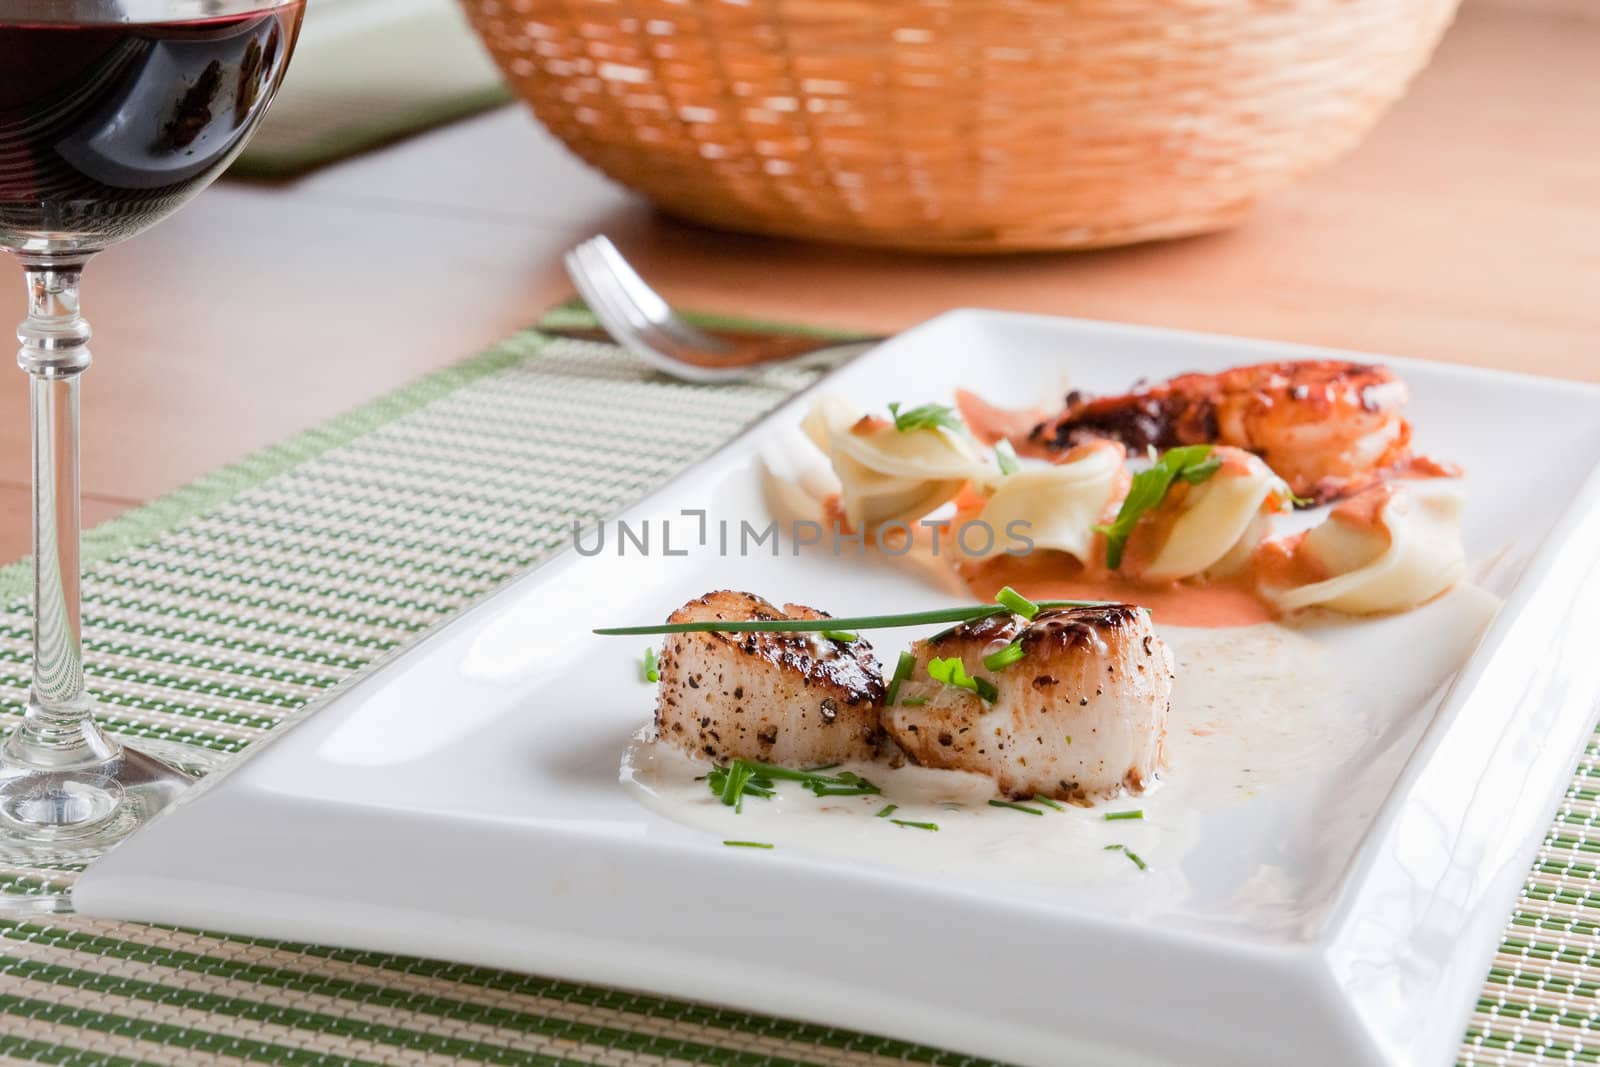 Roasted scallops by Talanis